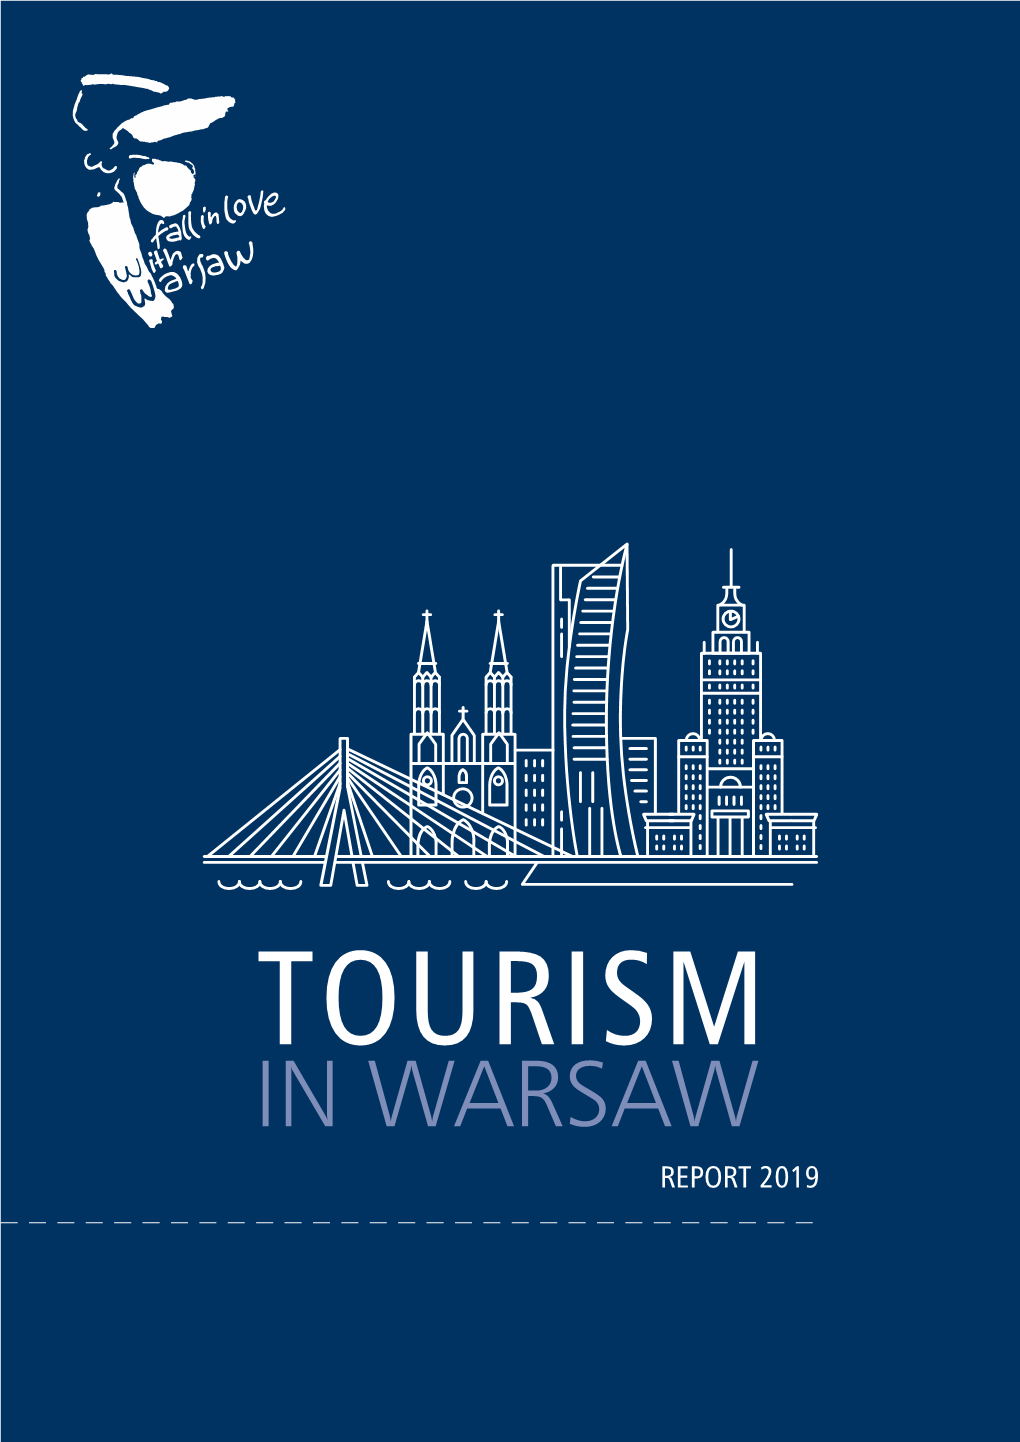 In Warsaw Report 2019